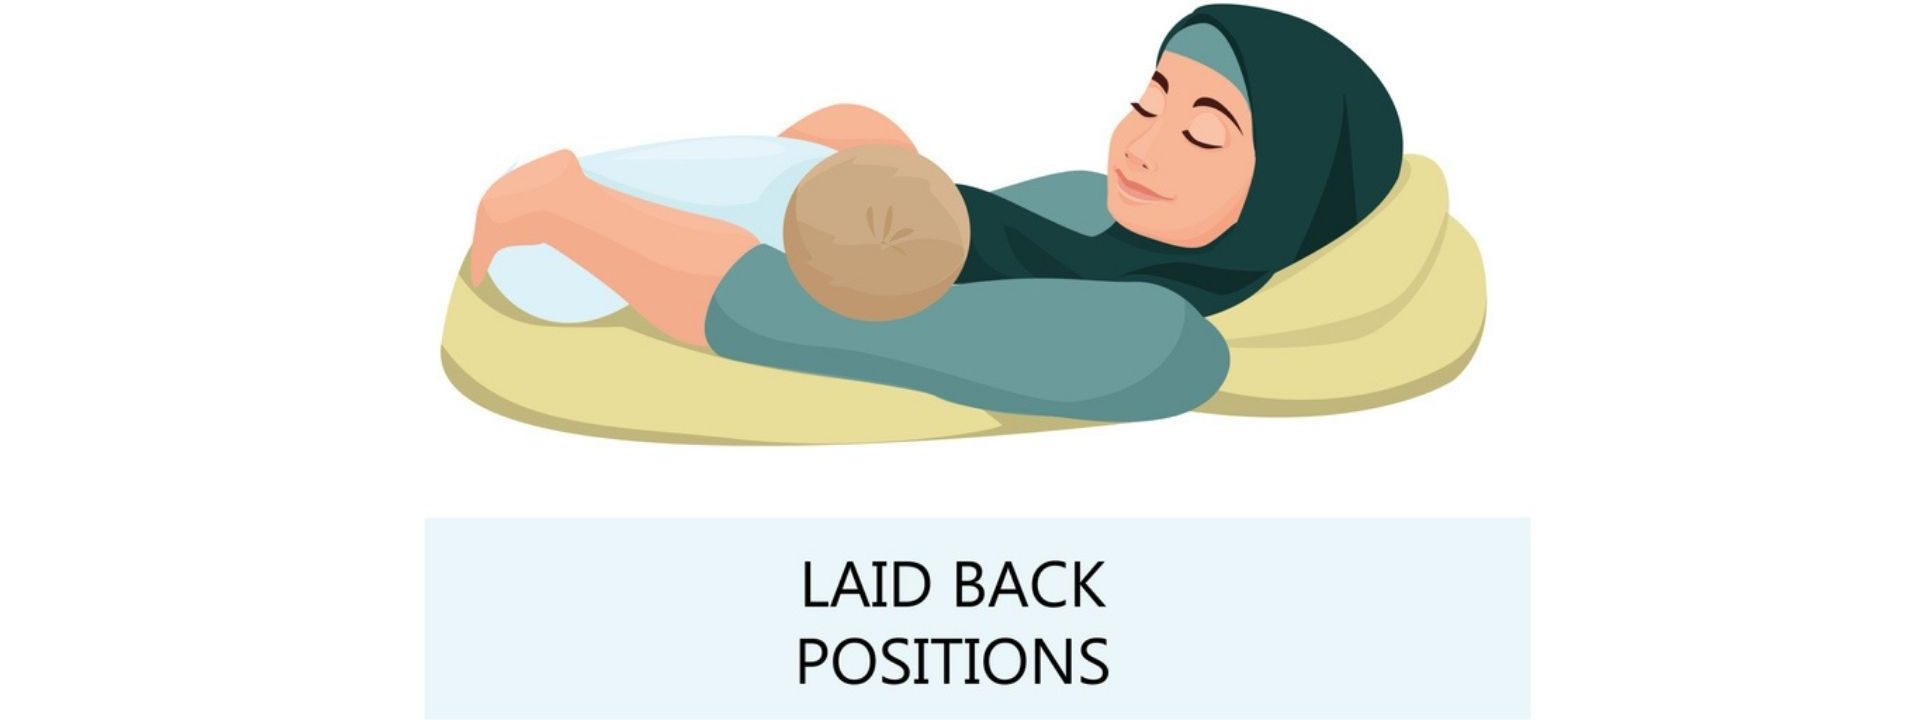 an infographic showing breastfeeding position two - a woman lying on her back